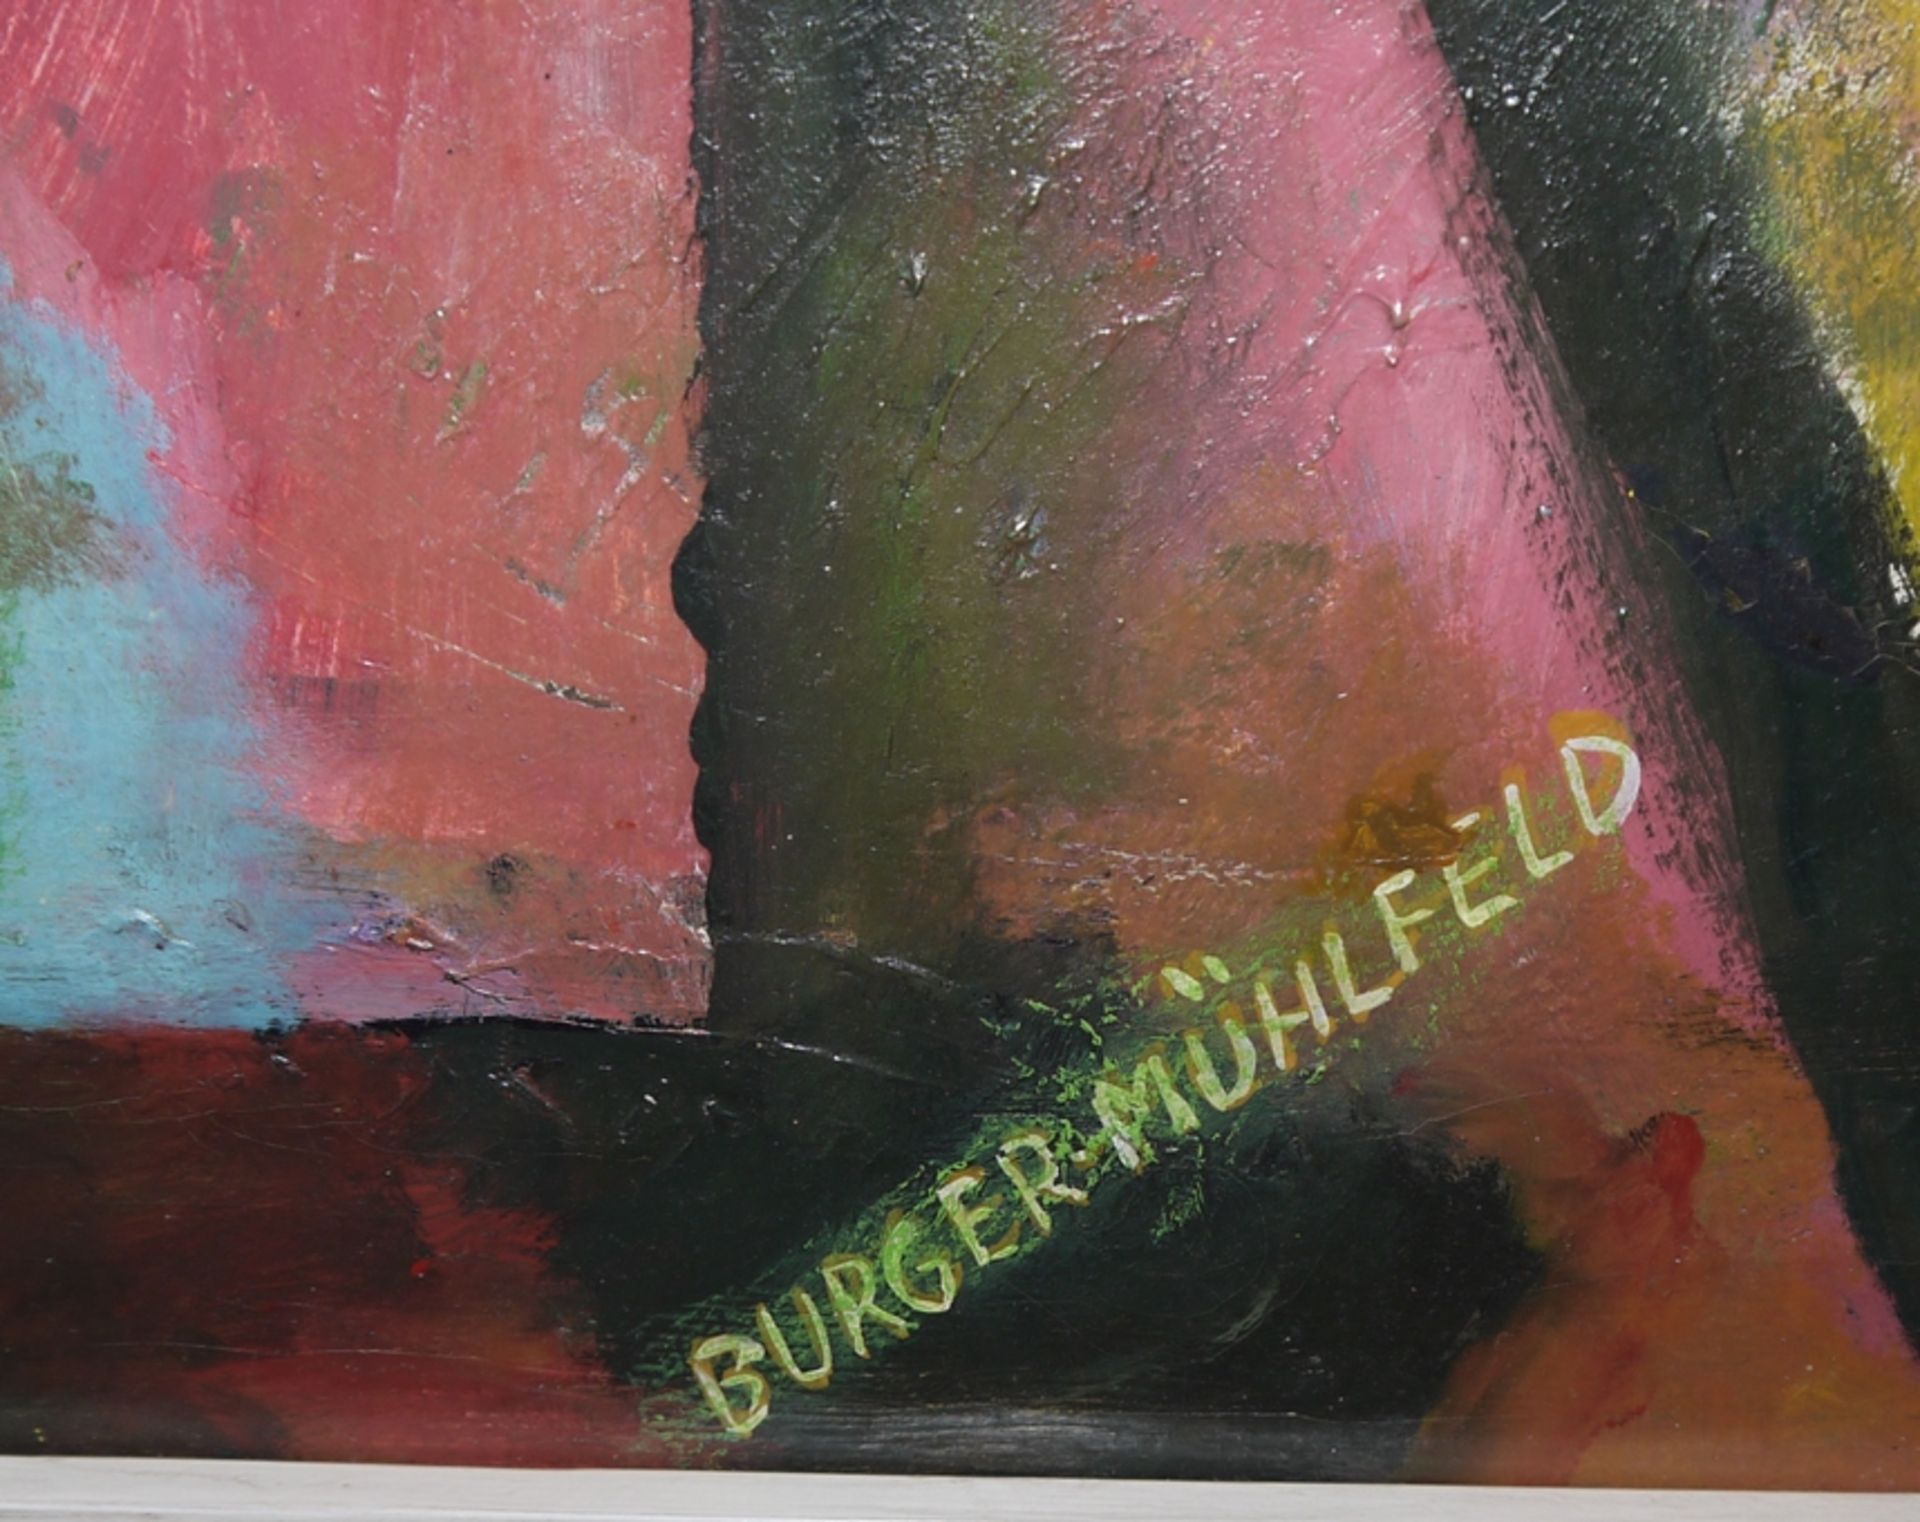 Fritz Burger-Mühlfeld, Large Abstraction, oil painting c. 1940/50, framed - Image 2 of 4